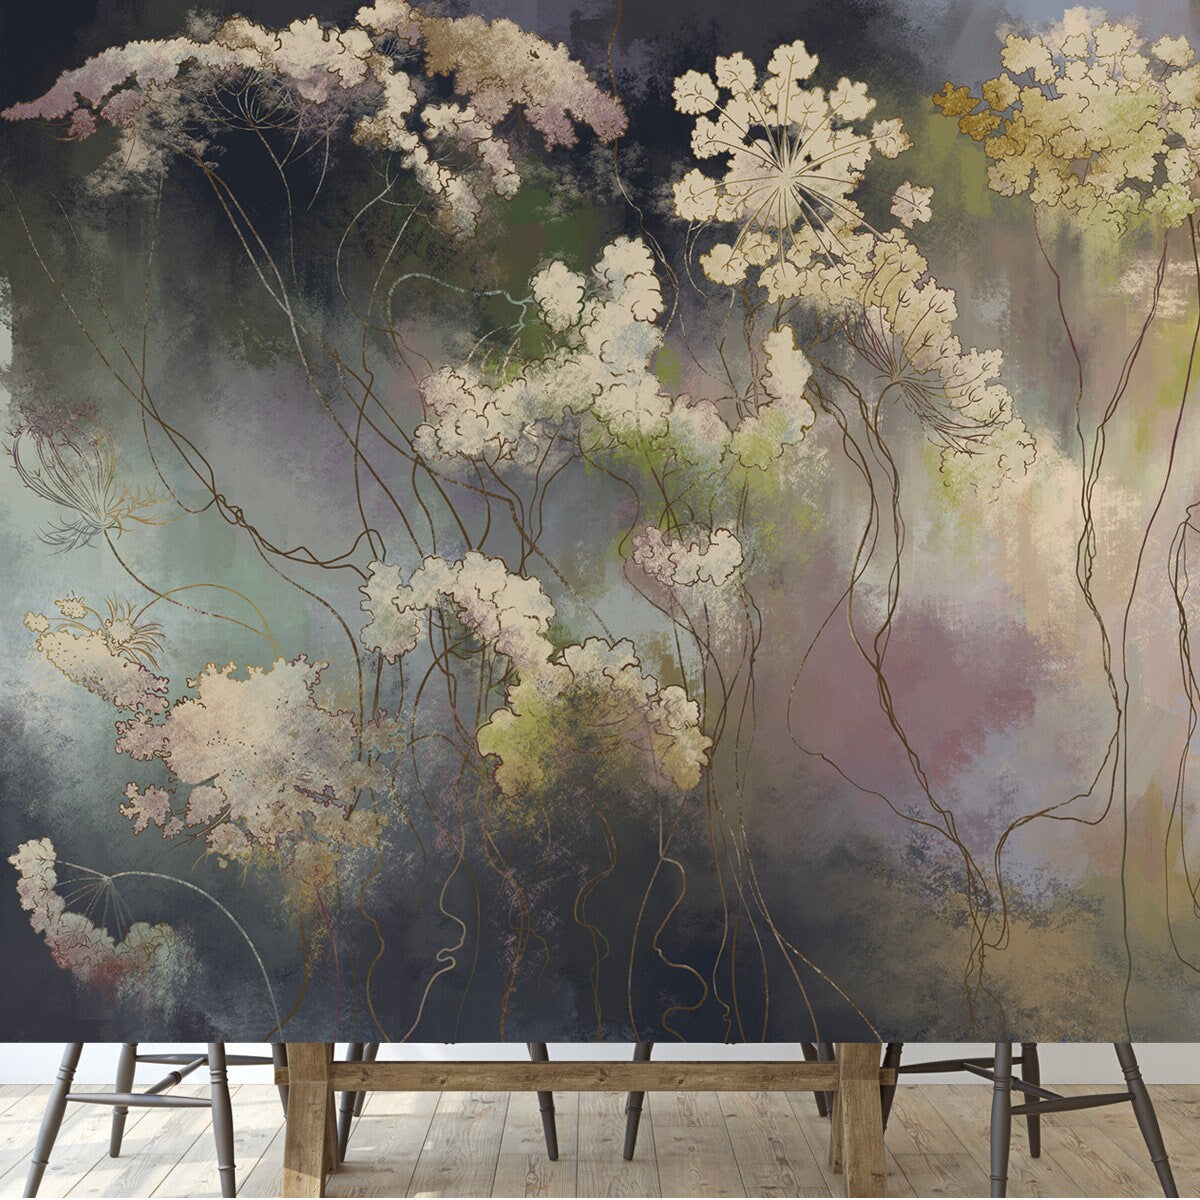 Graphic Wildflowers Painted on Dark Colorful Wall. Floral Background in Loft, Modern Style Wallpaper Dining Room Mural